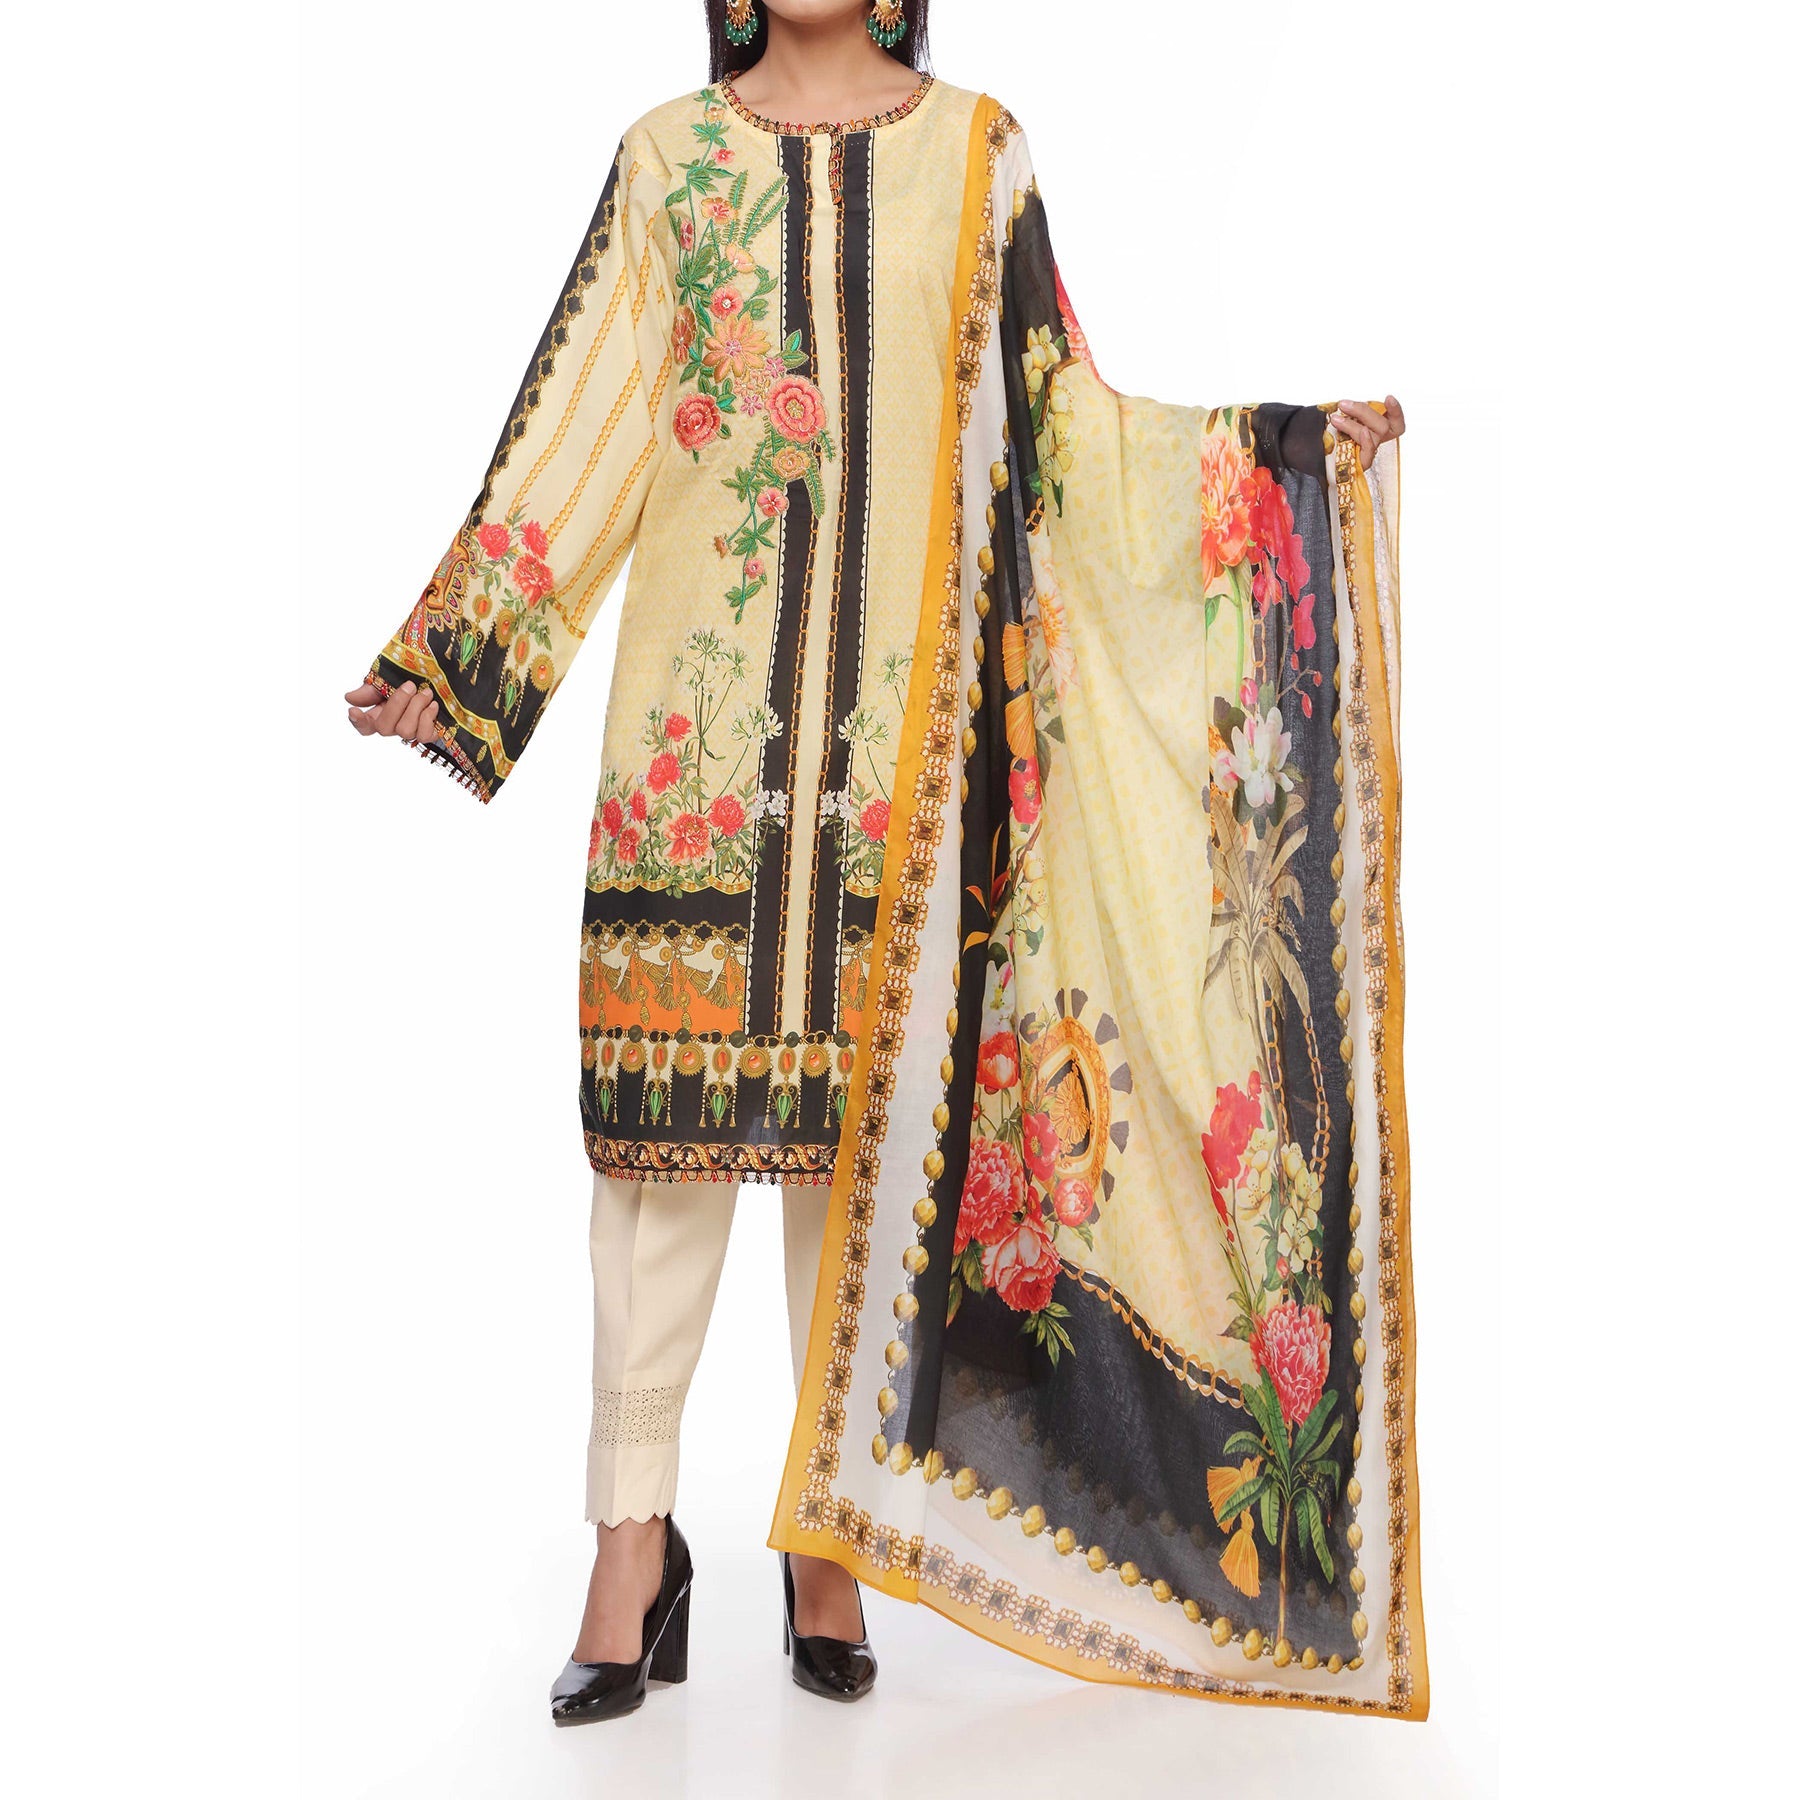 2PC- Unstitched Digital Printed Lawn Shirt With Dupatta PS2459